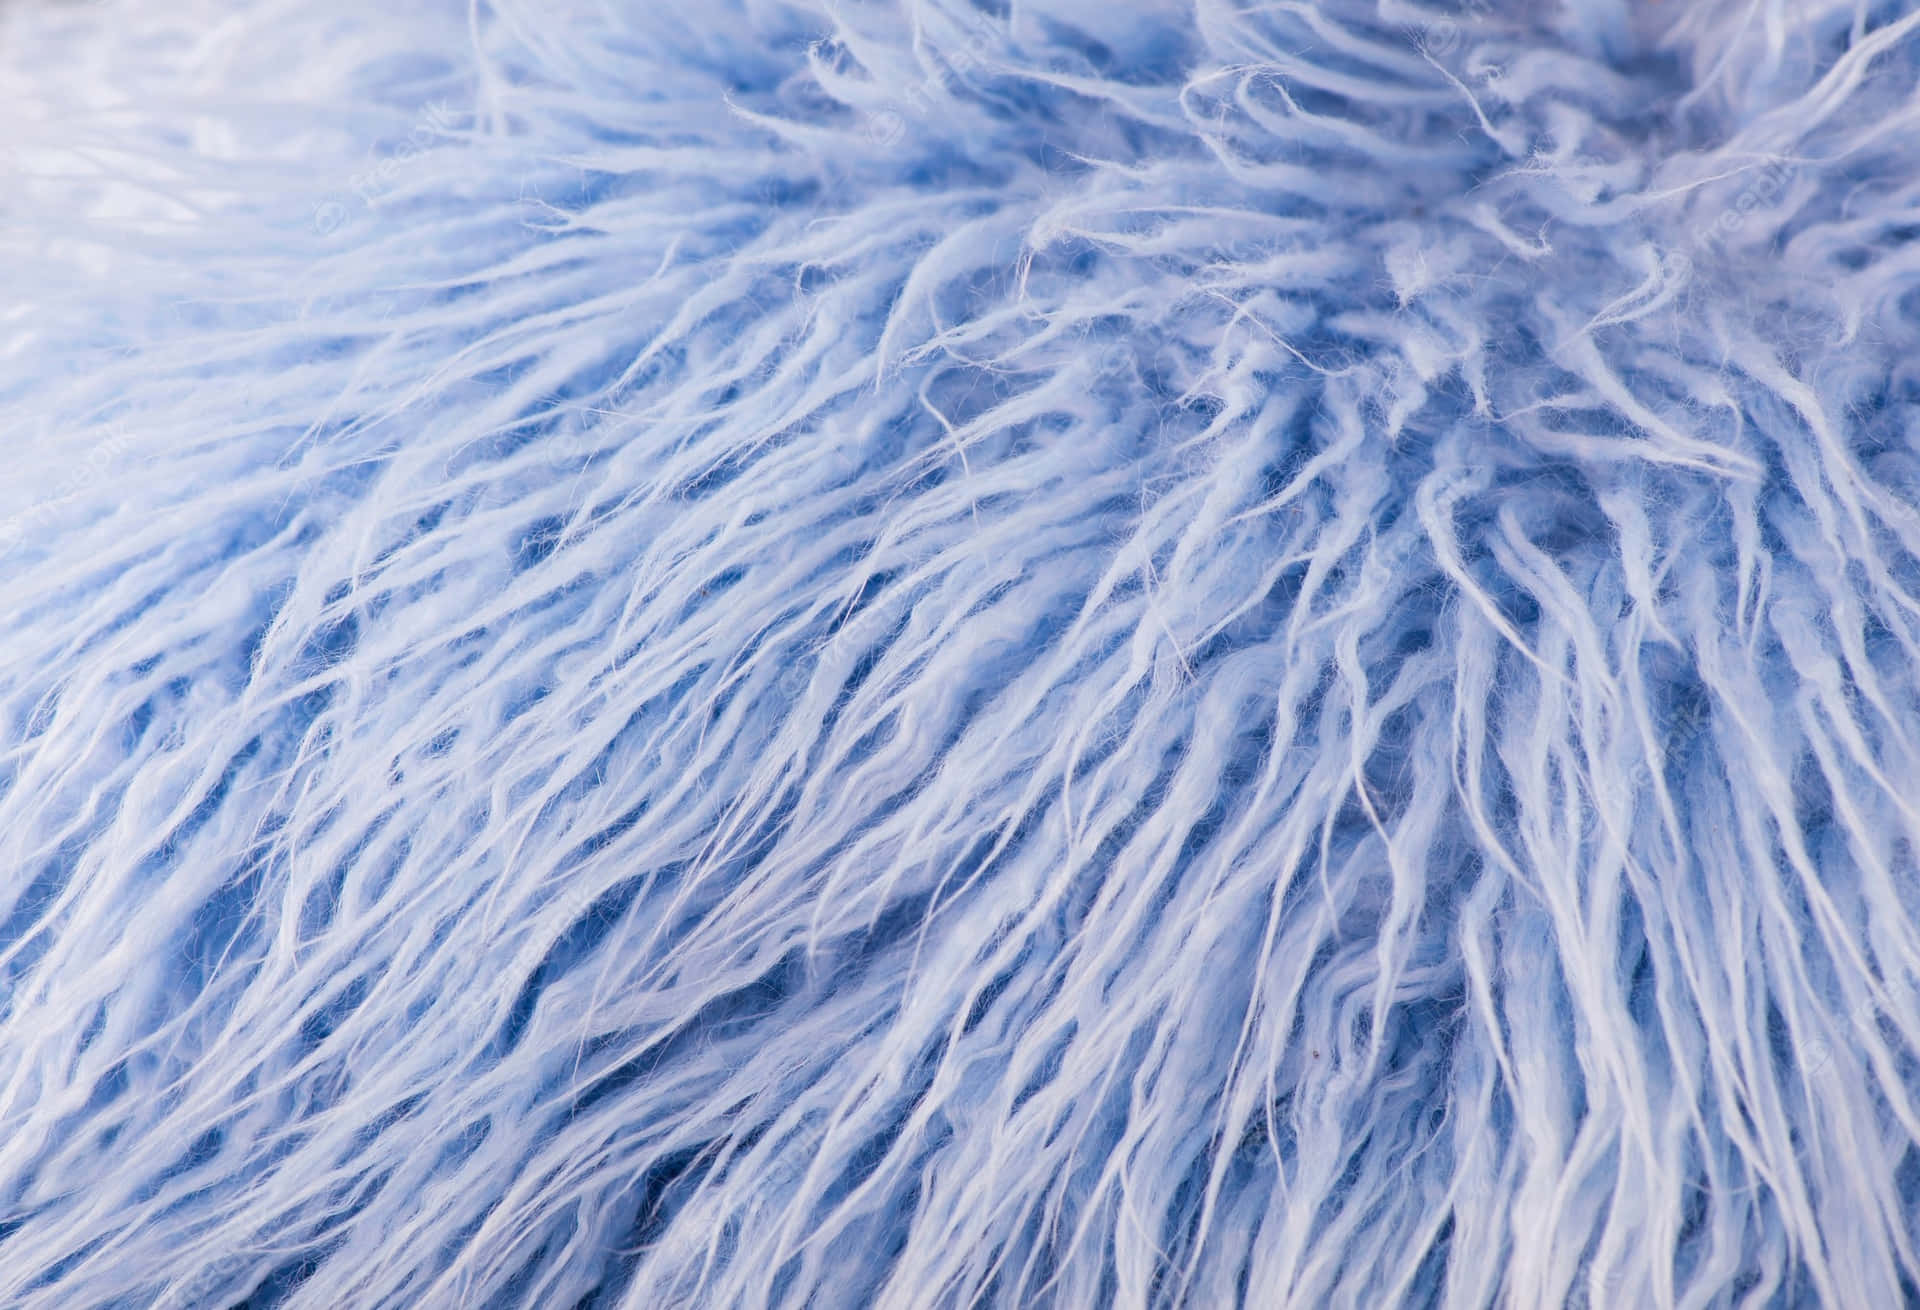 Download Fuzzy Blue Fabric Wallpaper | Wallpapers.com